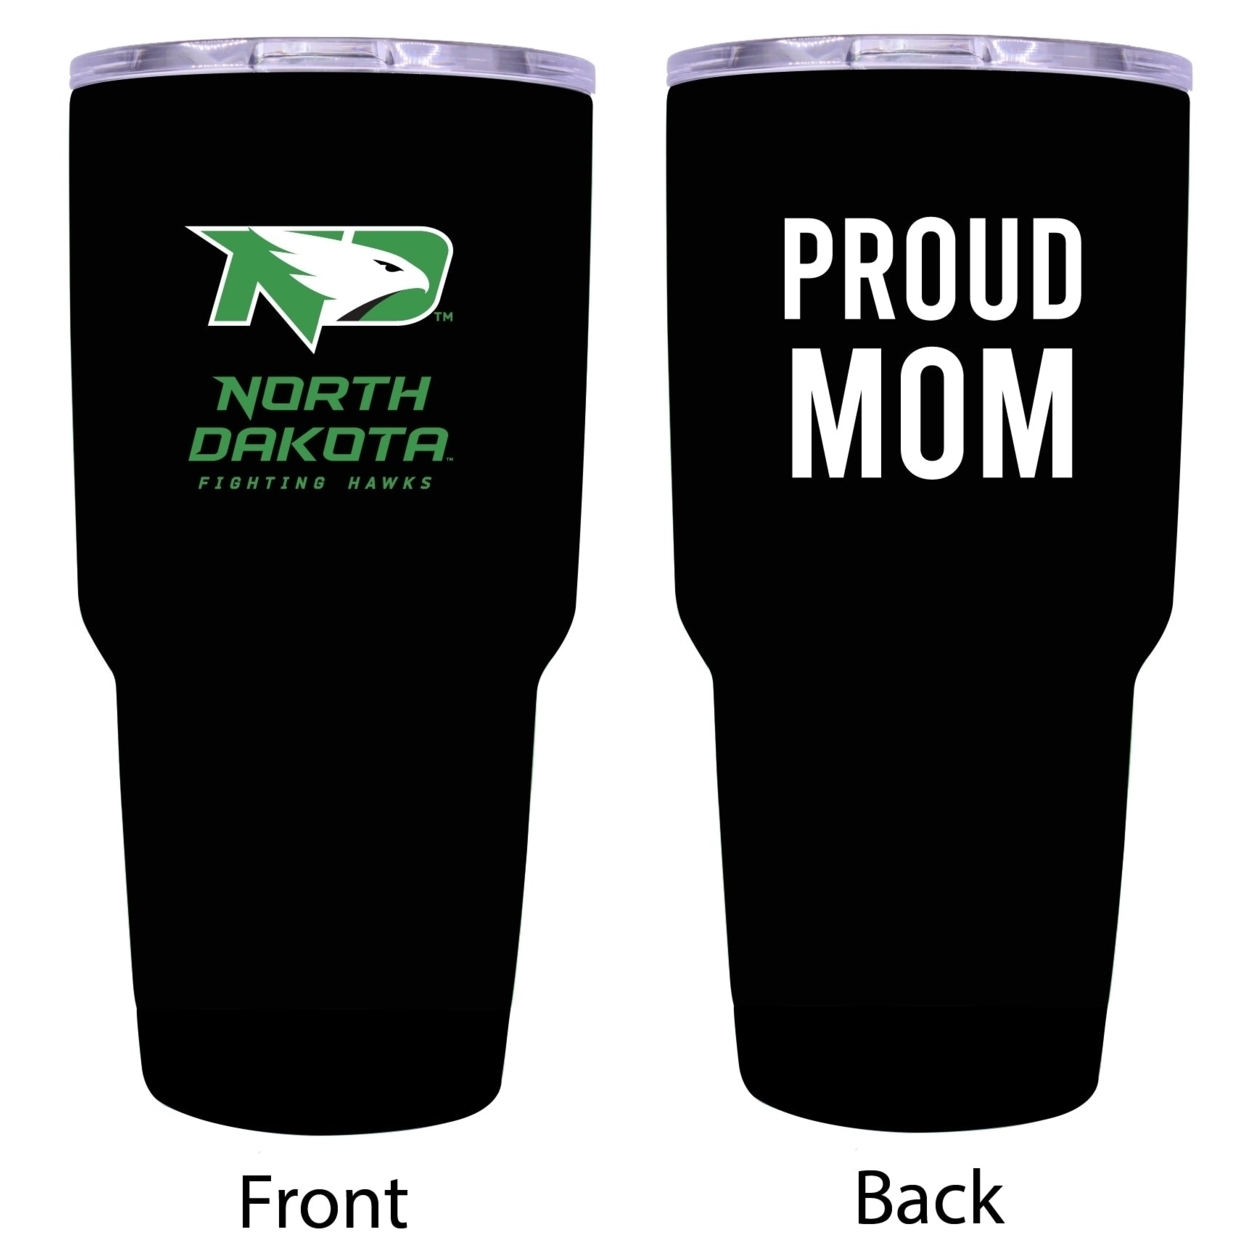 R And R Imports North Dakota Fighting Hawks Proud Mom 24 Oz Insulated Stainless Steel Tumblers Black.